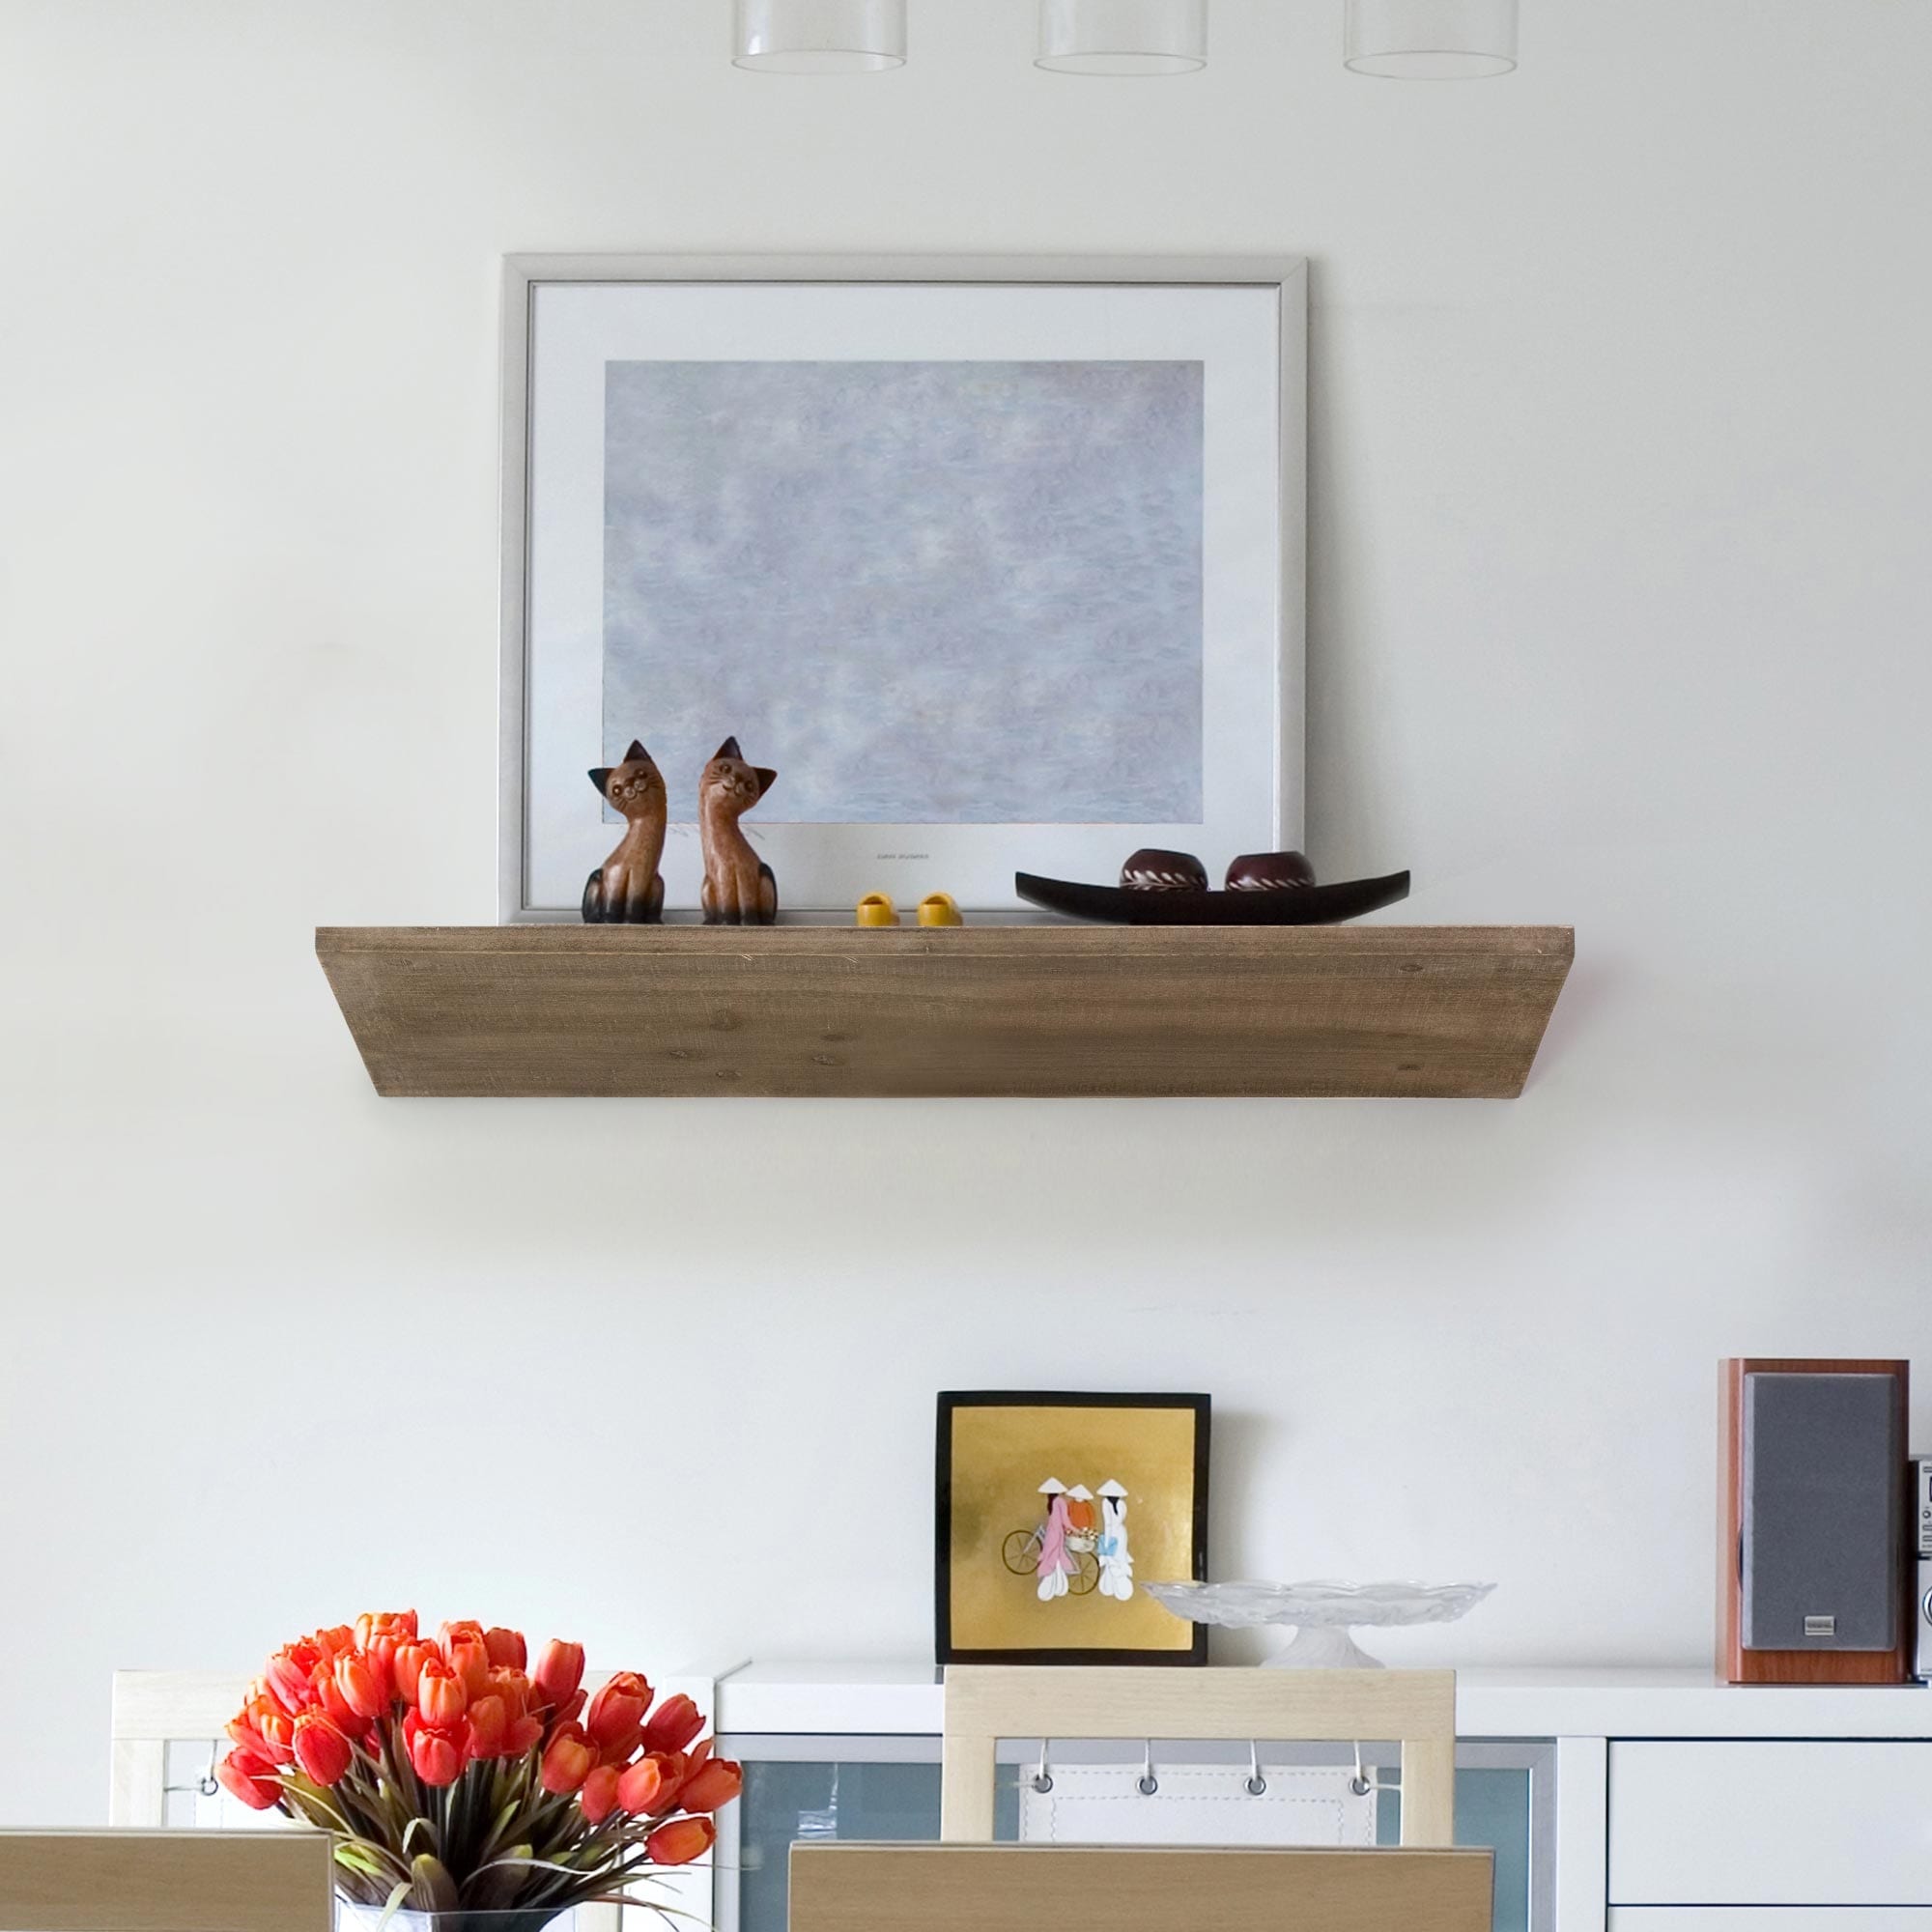 https://ak1.ostkcdn.com/images/products/is/images/direct/ab811788dd54eef860aa69656879d2c755f2c41b/American-Art-Decor-Small-Wedge-Wood-Floating-Wall-Shelf---Natural.jpg